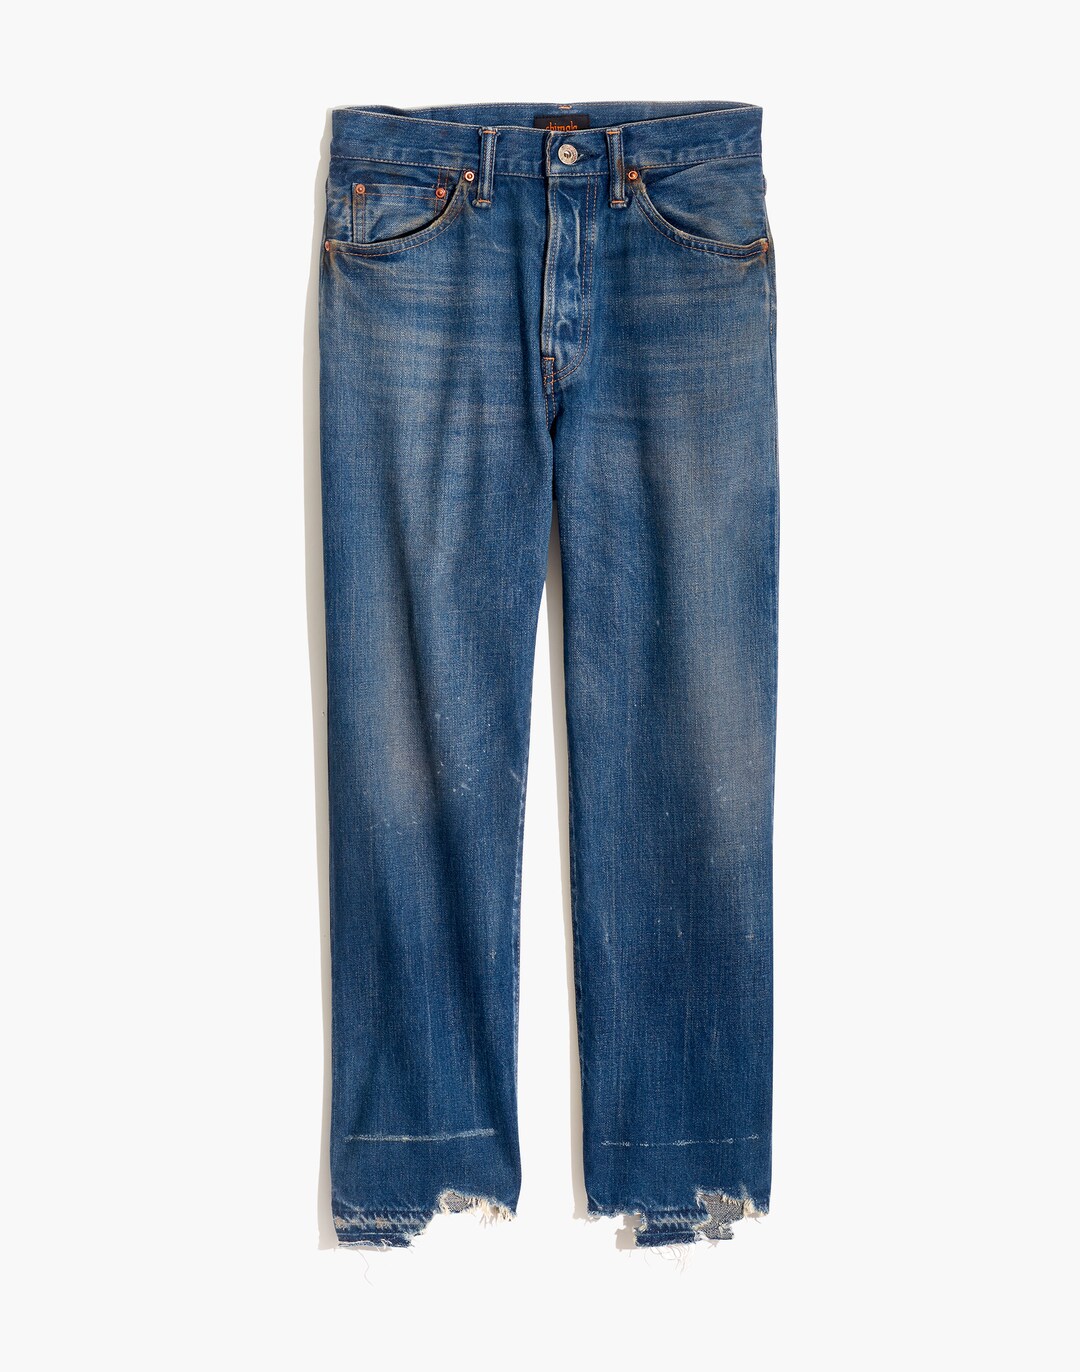 Chimala® Selvedge Denim Used Ankle Cut Jeans